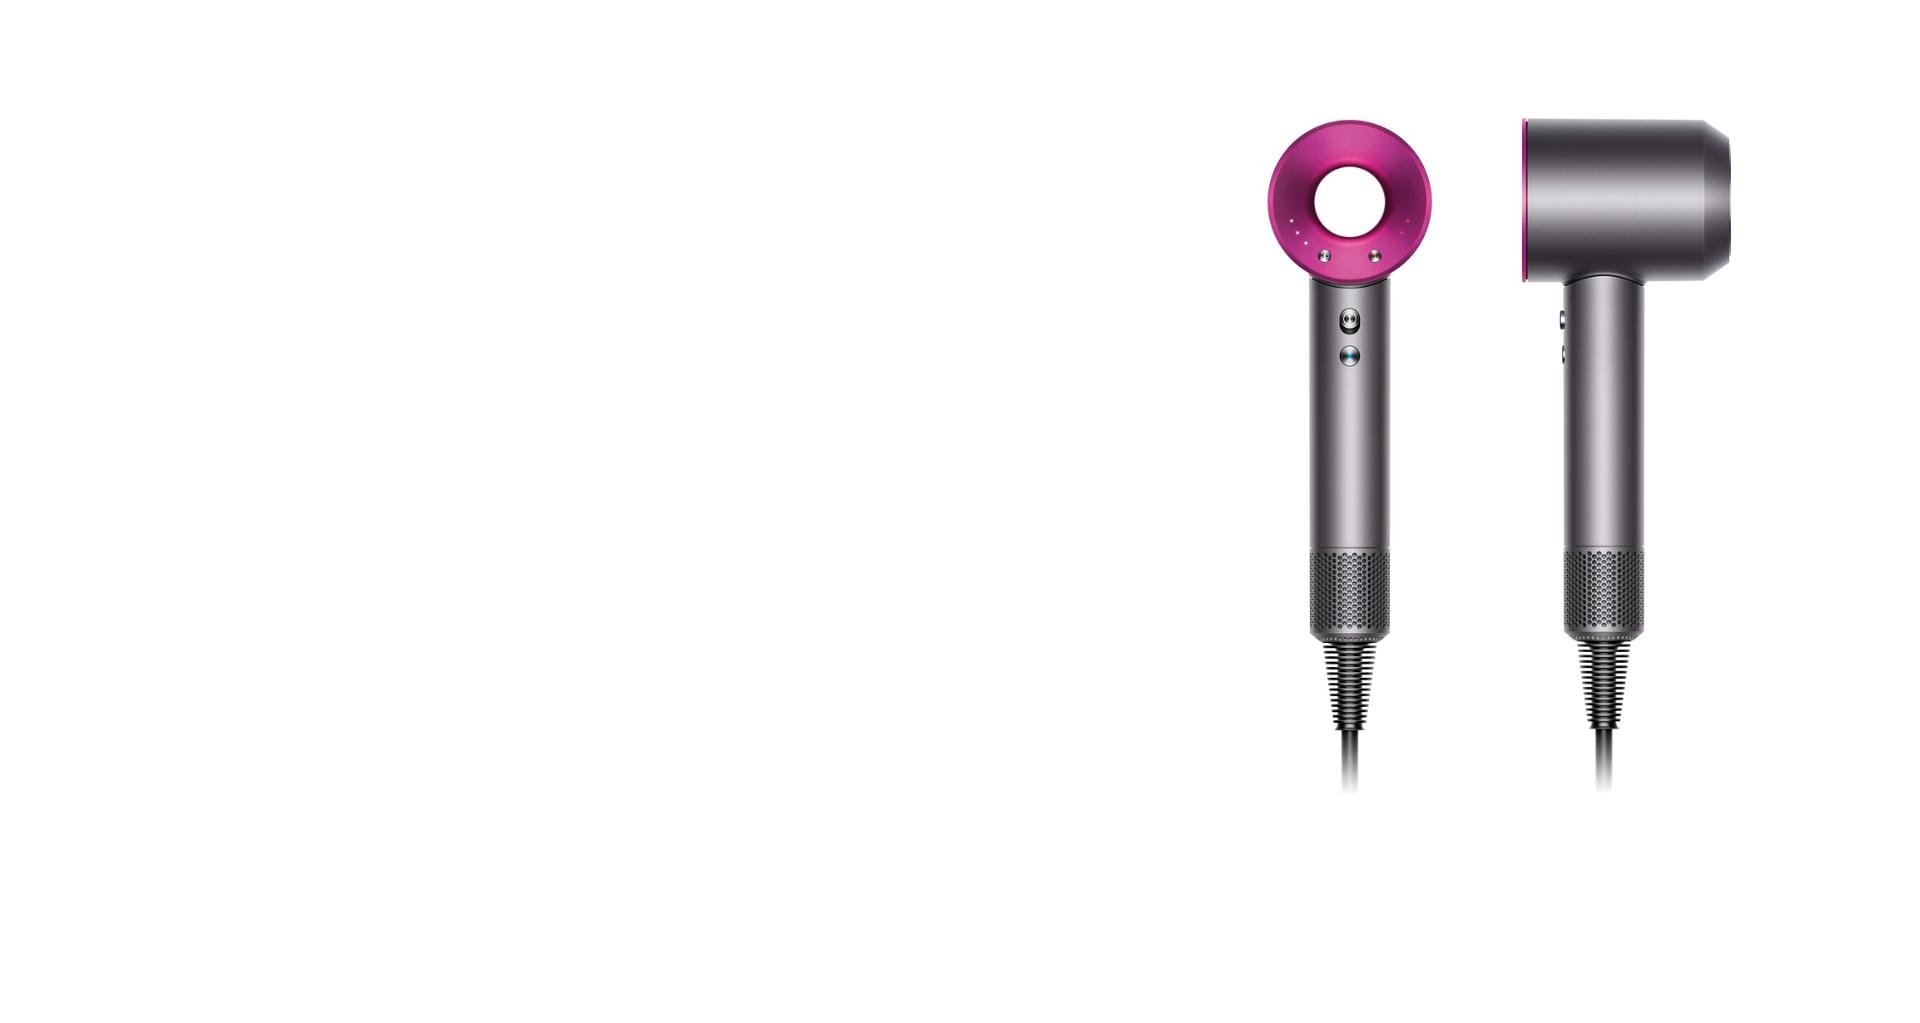 The Dyson Supersonic from front angle and side